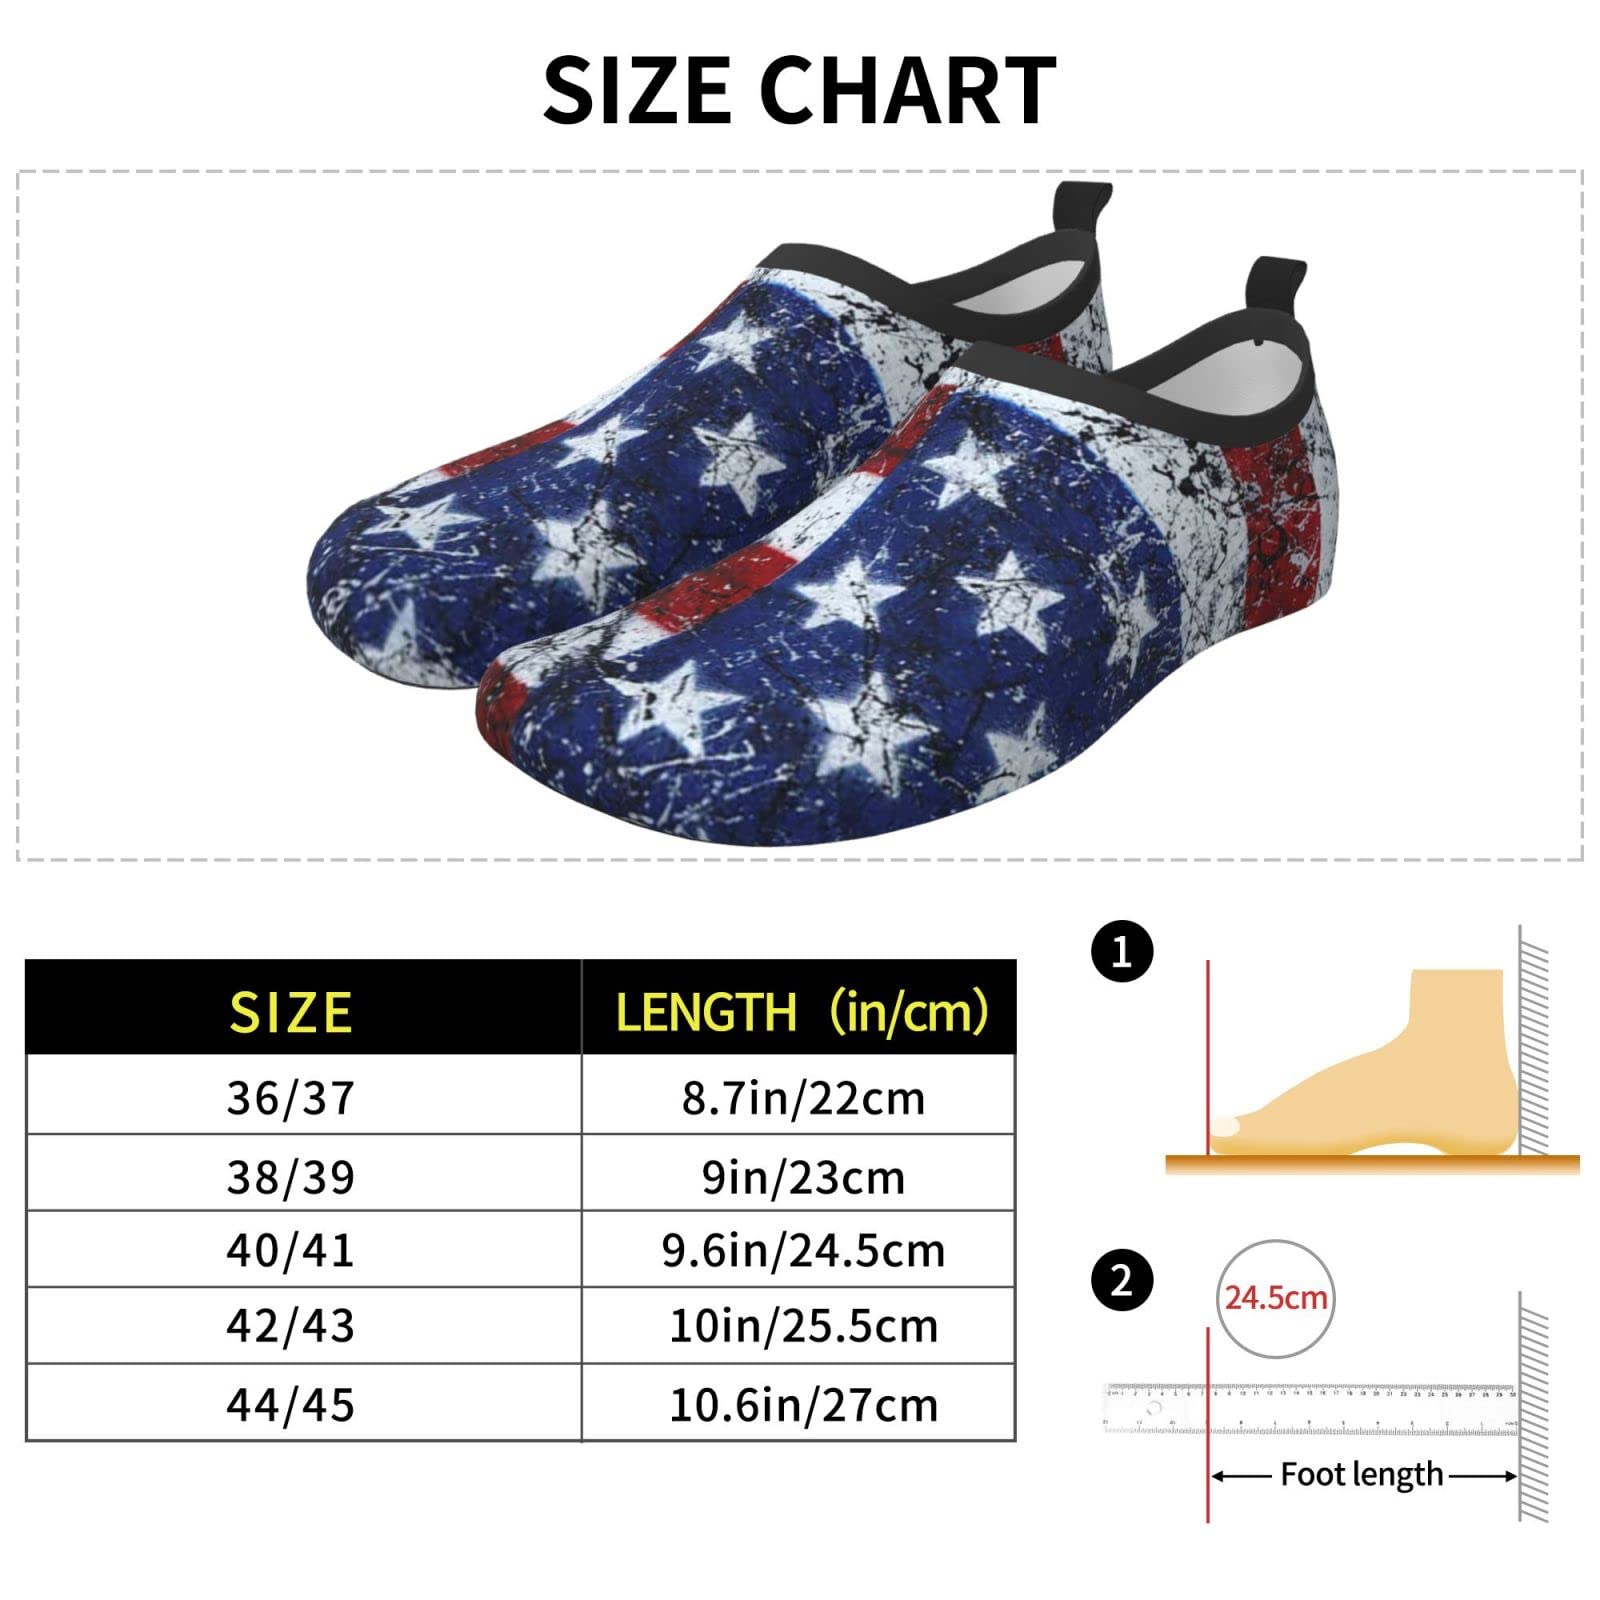 American Flag Art Red White and Blue Water Shoes Outdoor Exercise Aqua Socks Adult Aqua Socks Necessities for Men Women Water Games